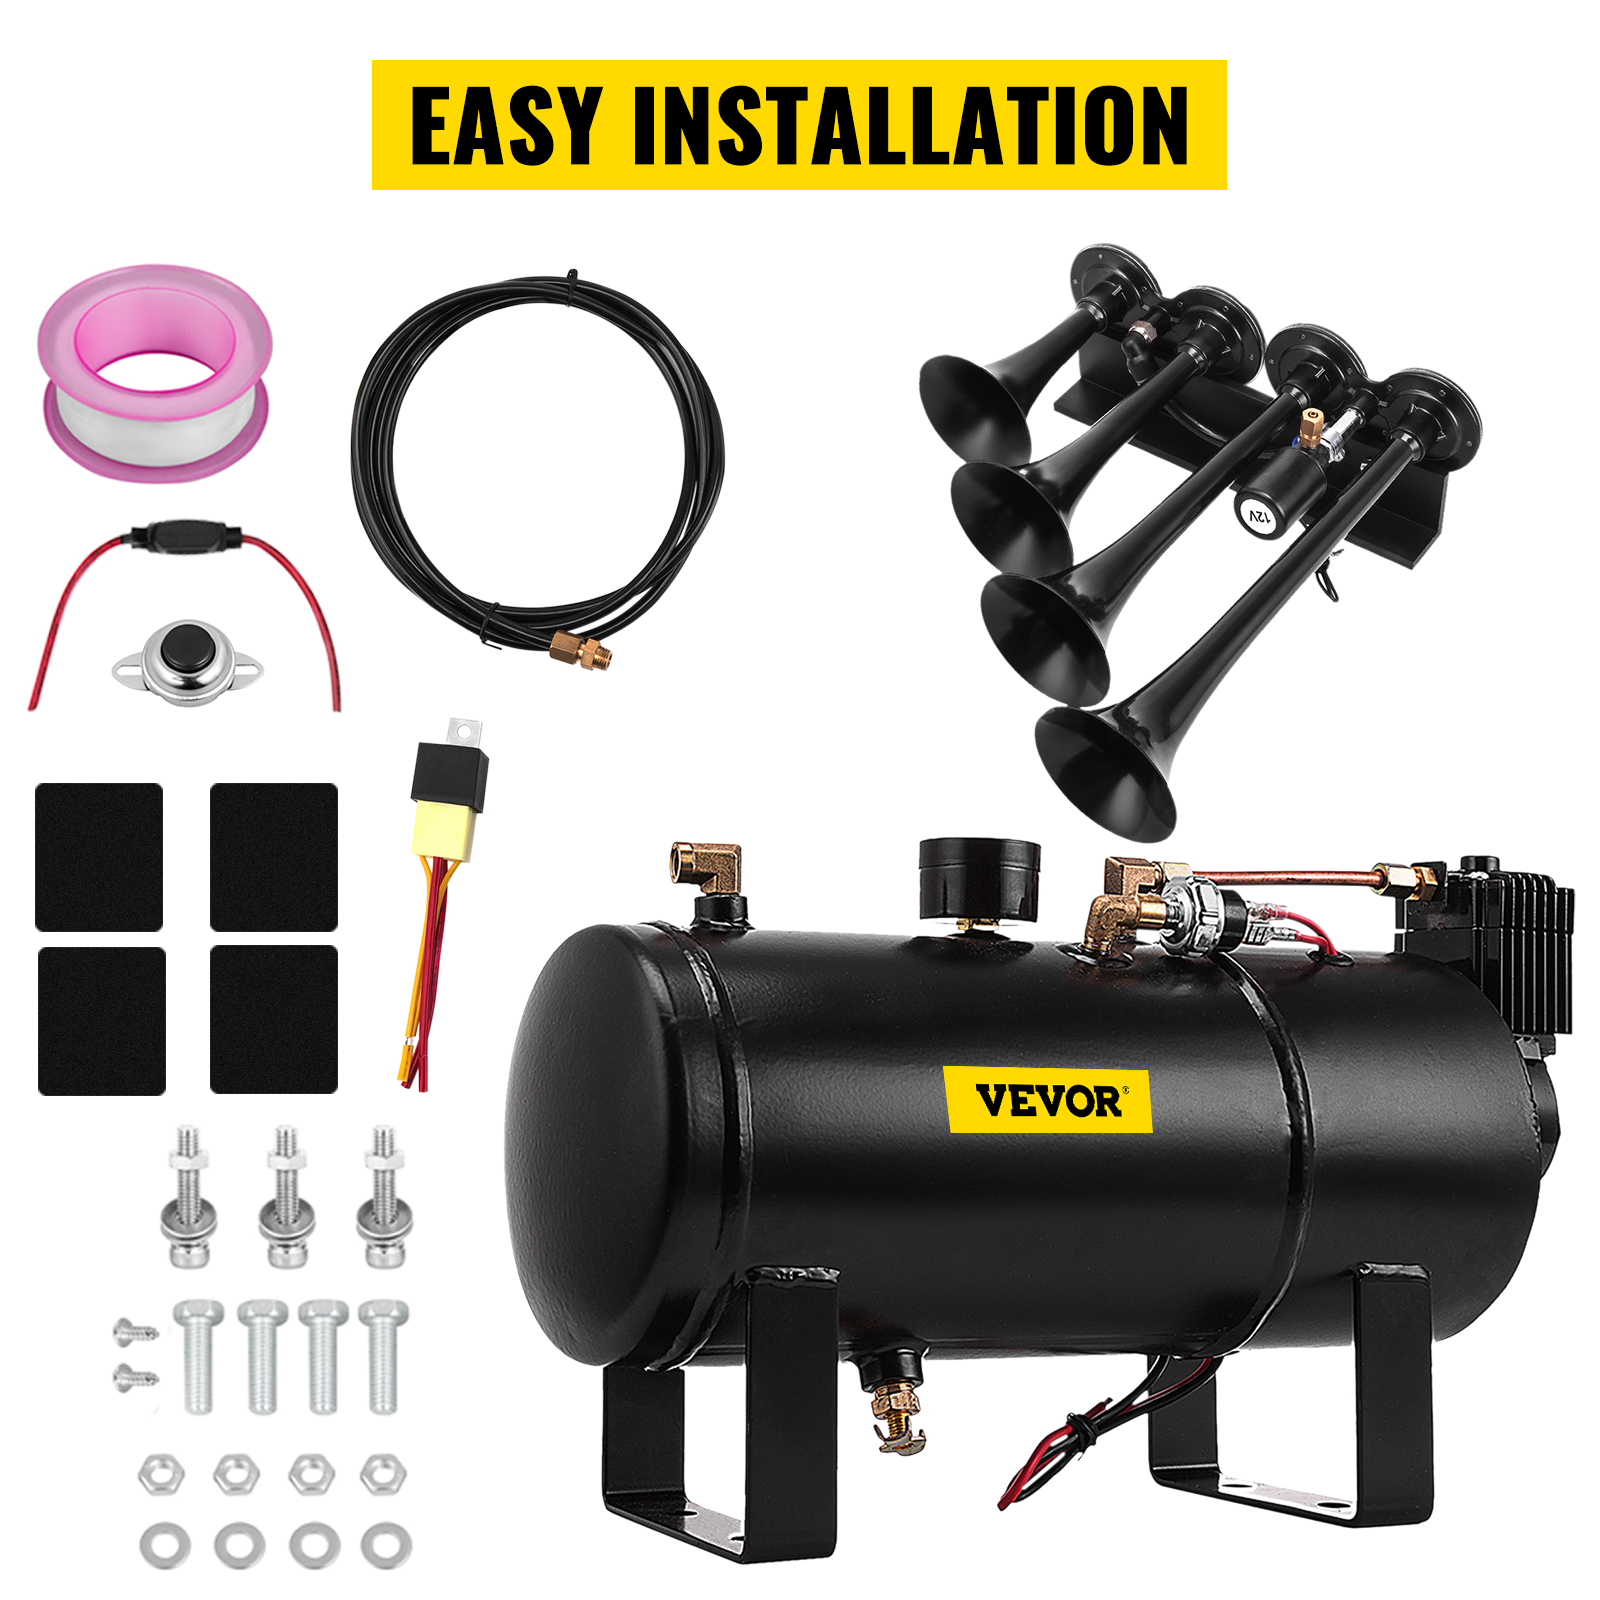 VEVOR 150DB Train Air Horn Kit 4 Trumpet For Train Horns Fits Almost Any  Vehicle, Truck, Car, Jeep or SUV, With 120PSI 12V Air Compressor